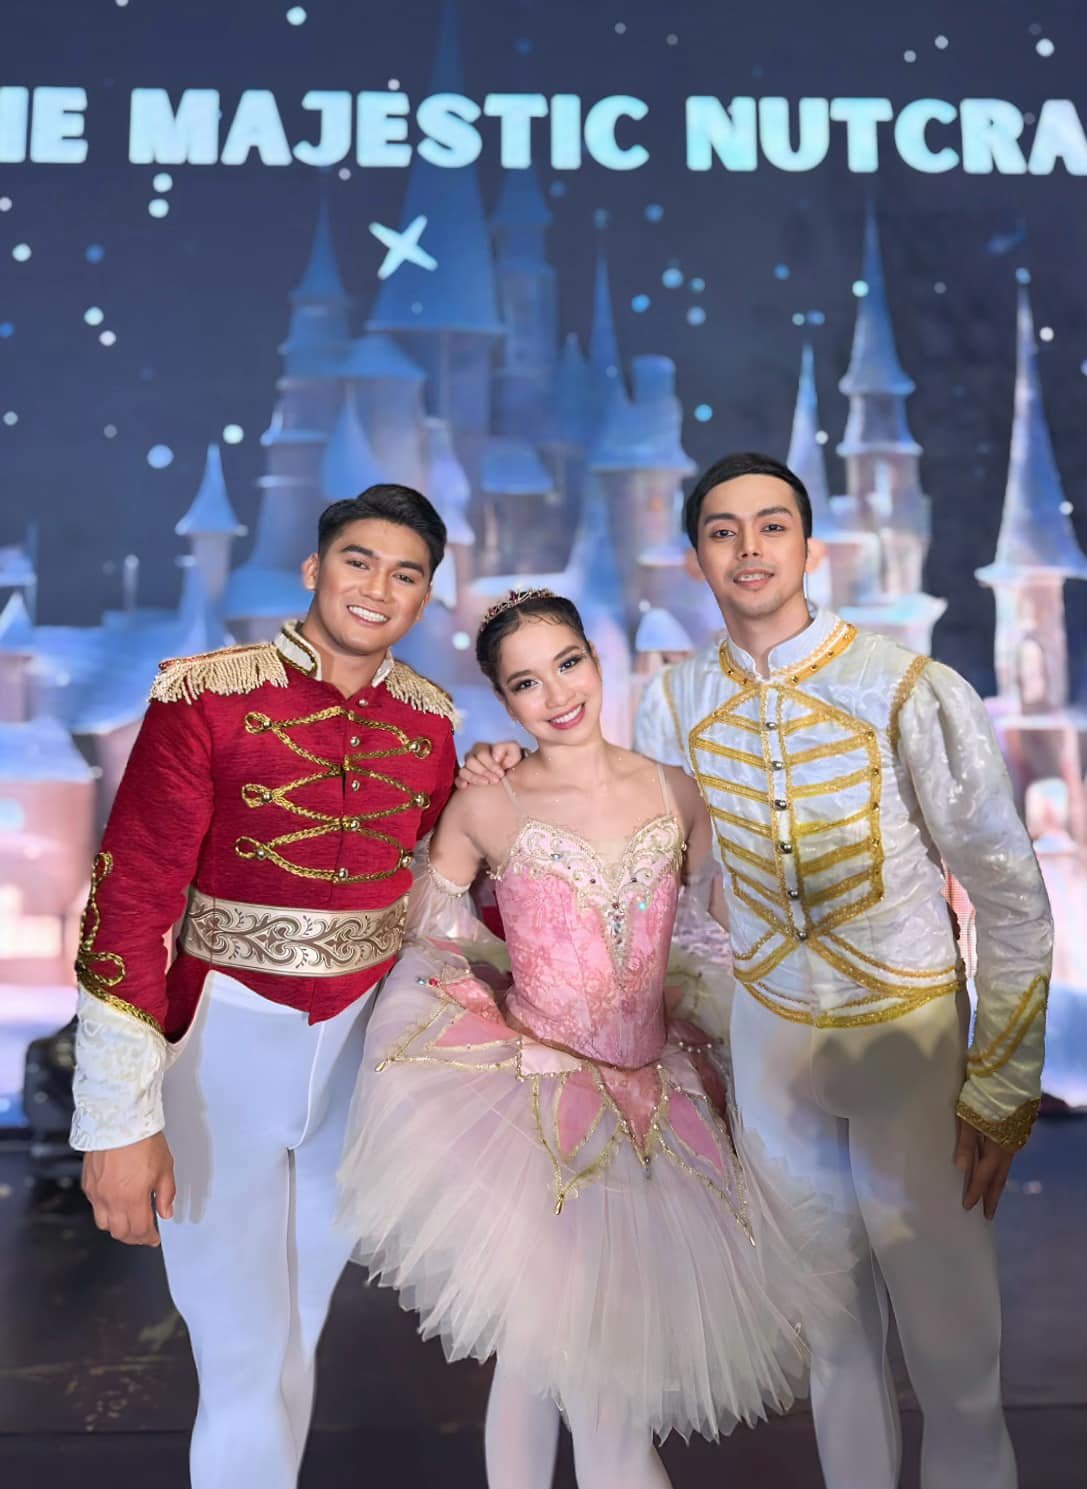   Guest artist King George Bueno, who played The Nutcracker in the Ballet Baguio show, described sharing the stage with Sean and Pearl as an exciting, joyous and memorable experience. Photo courtesy of King George Bueno  